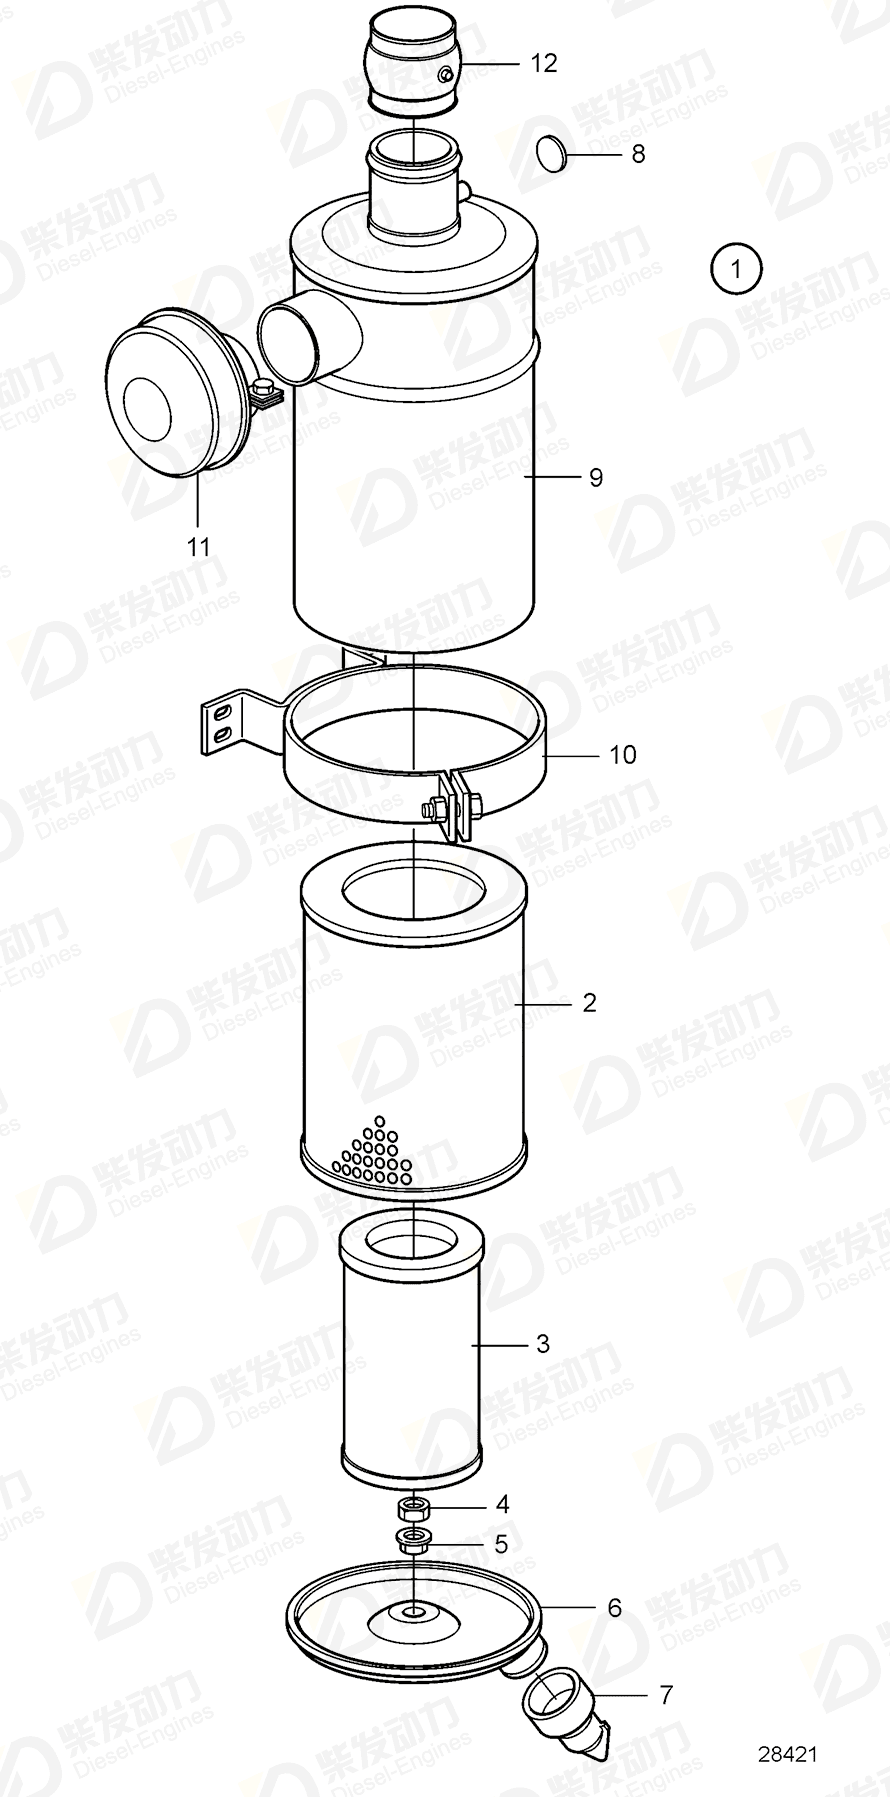 VOLVO Connector 22743970 Drawing